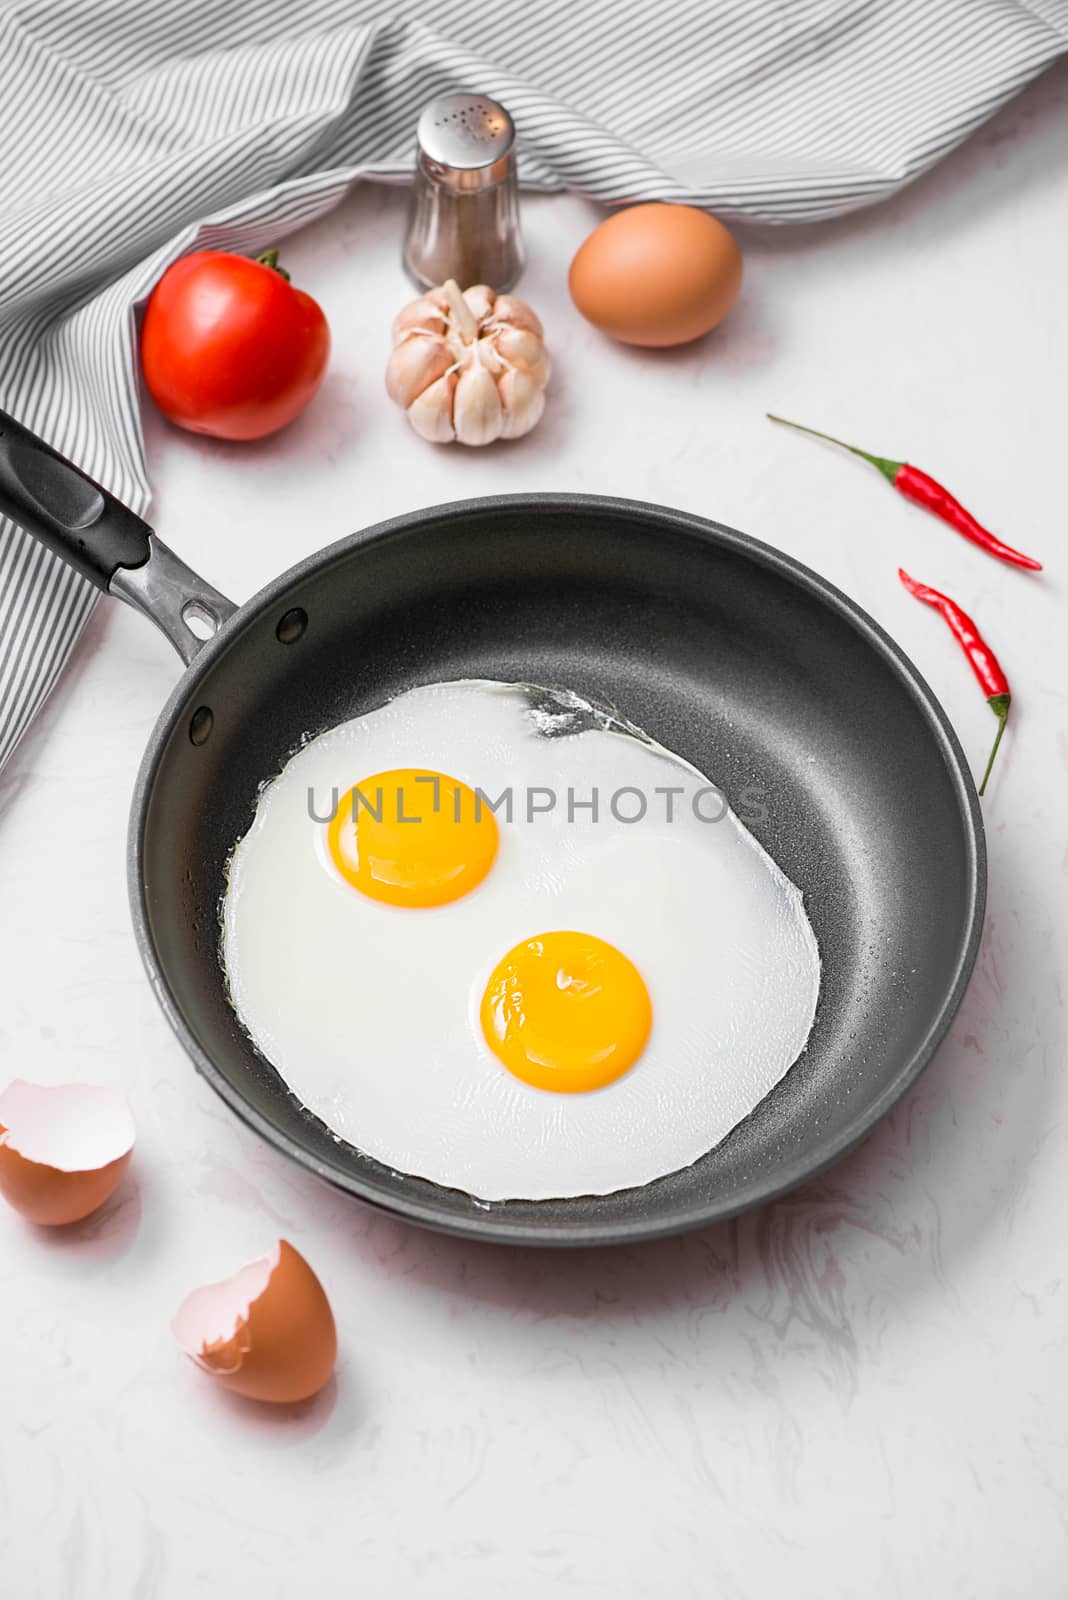 Fried eggs in a frying pan with cherry tomatoes and bread for breakfast